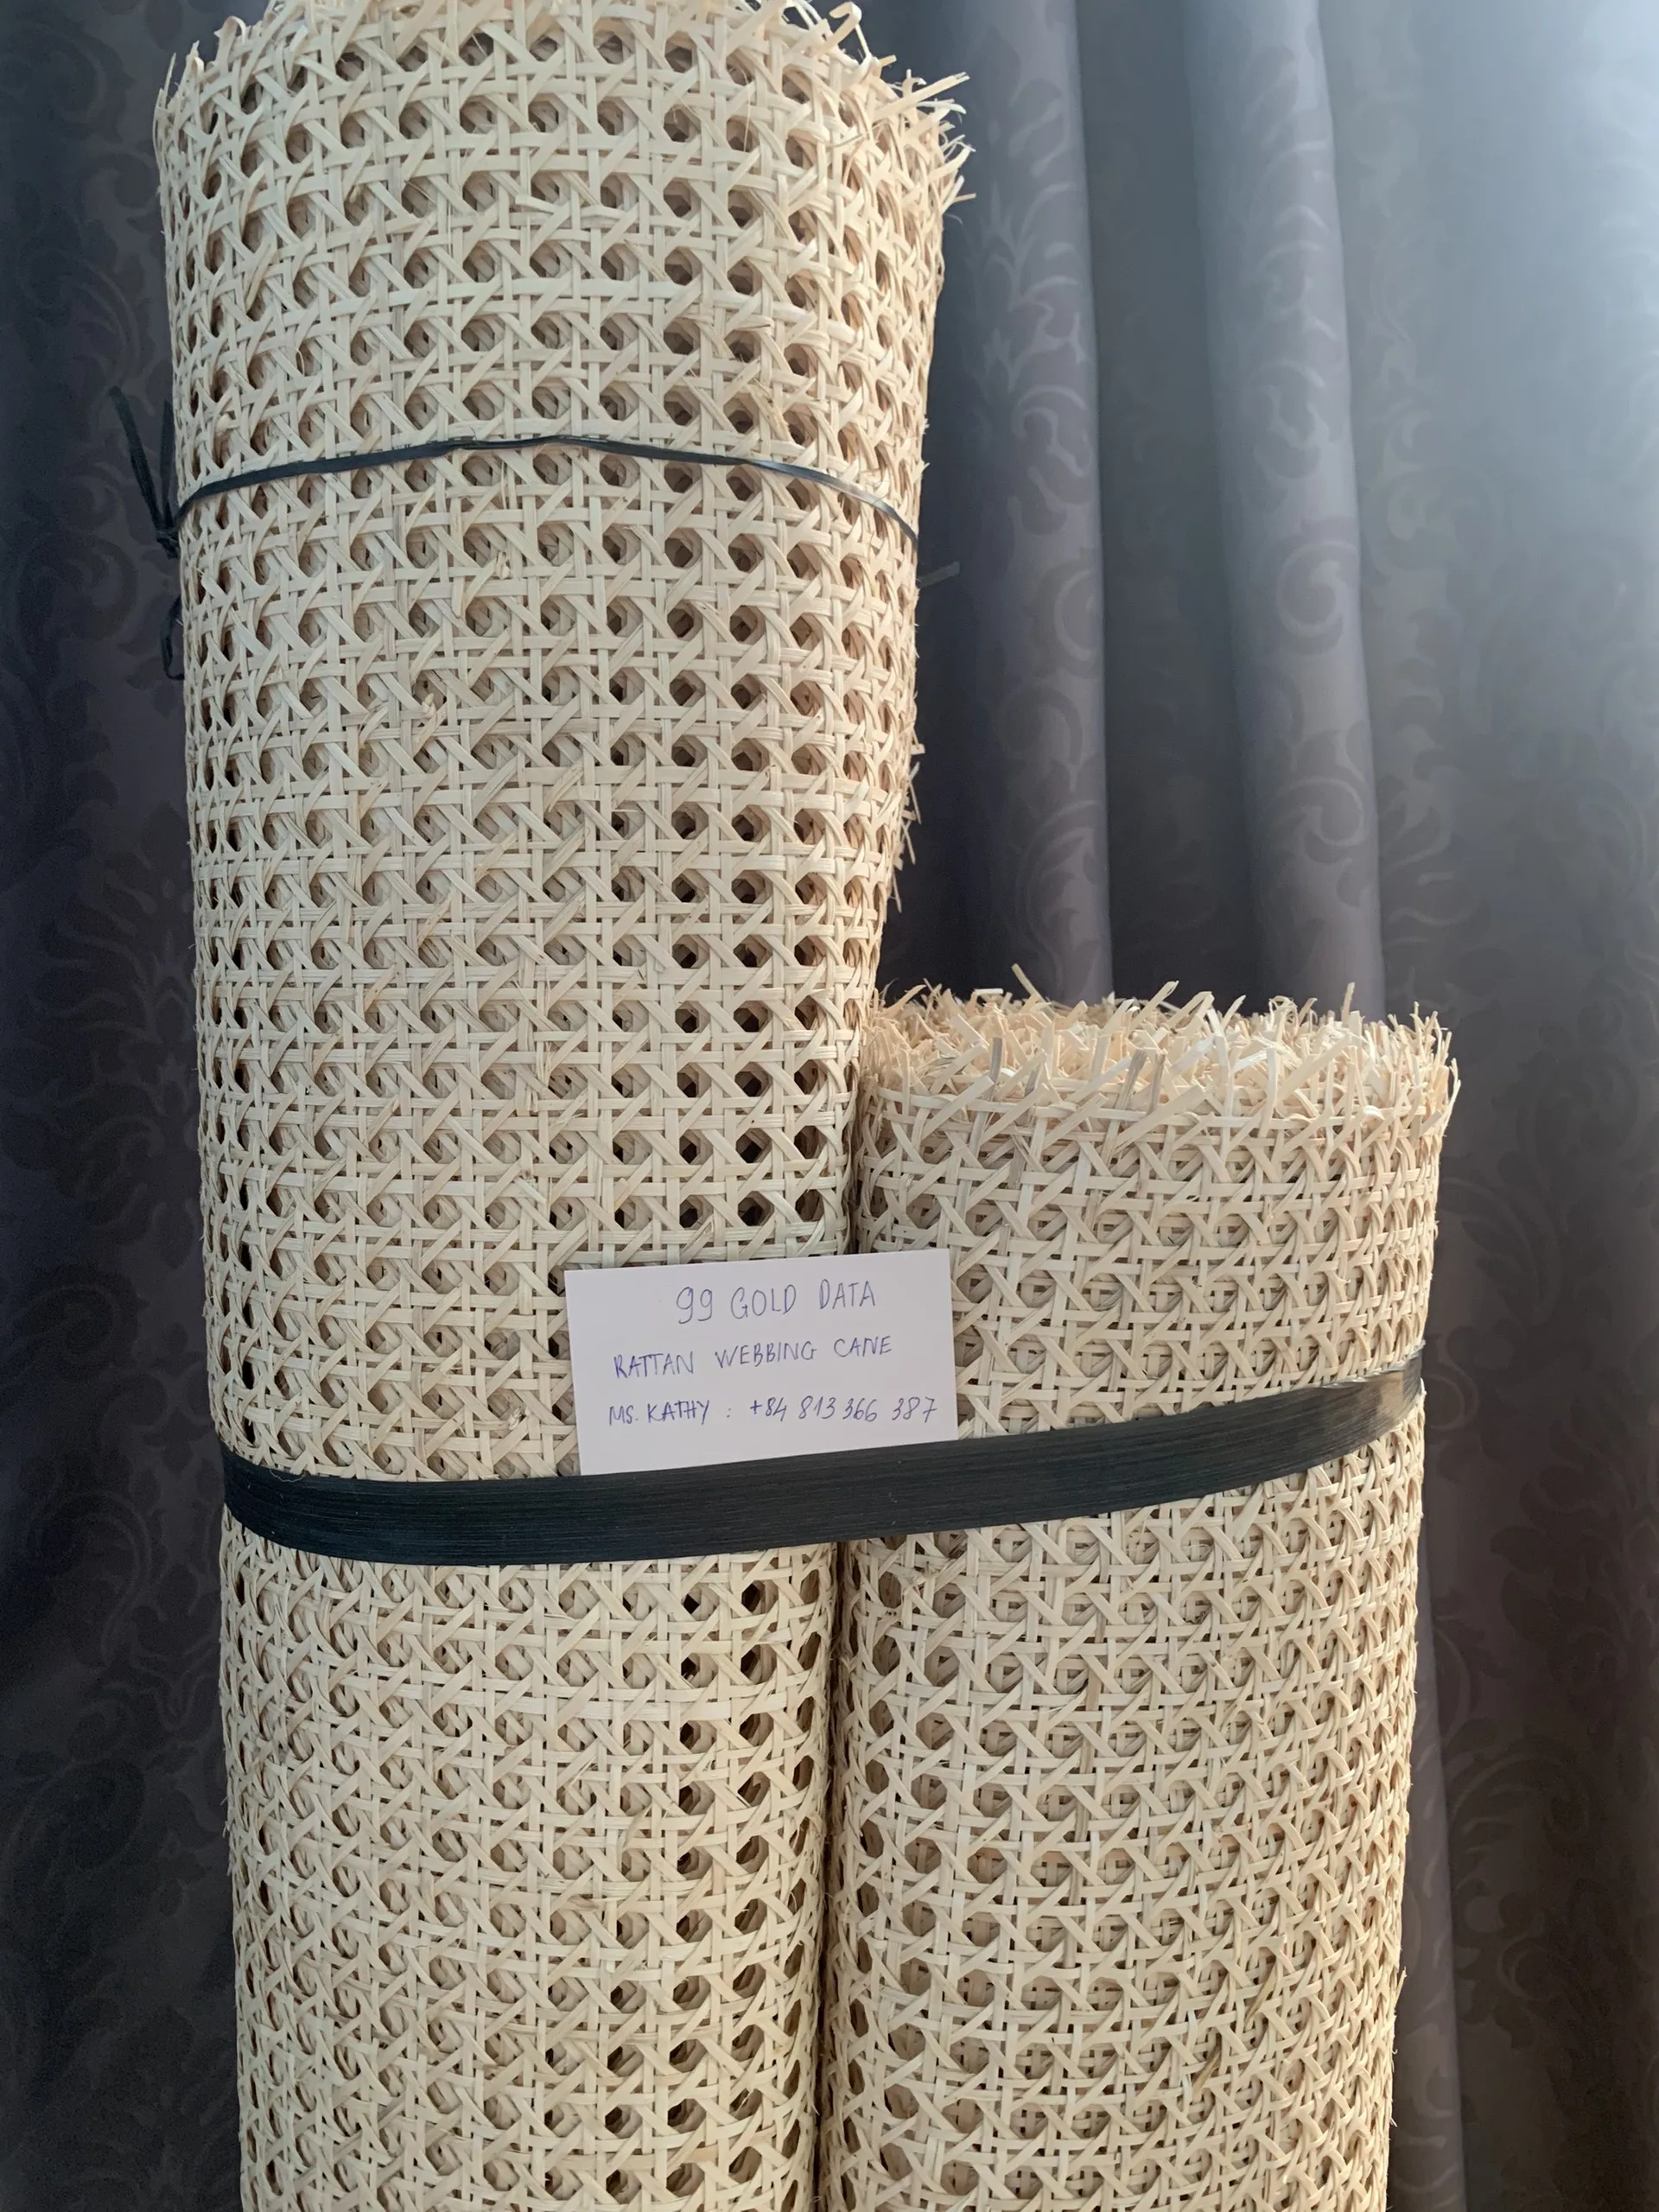 
Best Selling Rattan Cane Webbing Roll Natural Mesh Furniture Bleached Square Woven Rattan Cane Webbing 